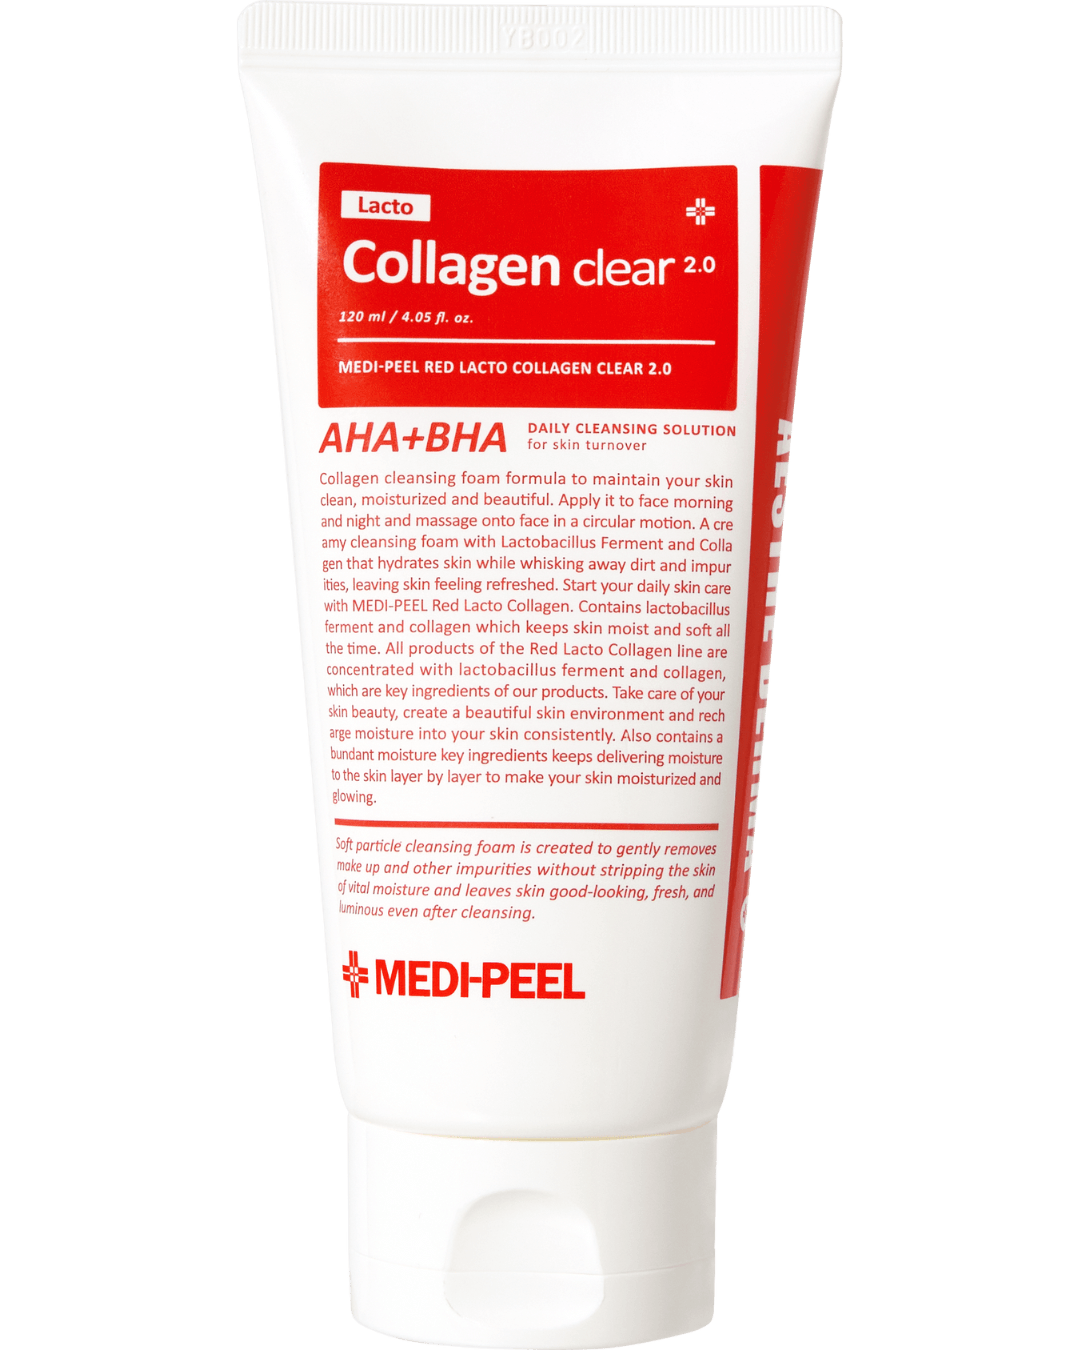 Daily Vanity Beauty Awards 2024 Best Skincare MEDIPEEL Red Lacto Collagen Clear 2.0 Voted By Beauty Experts